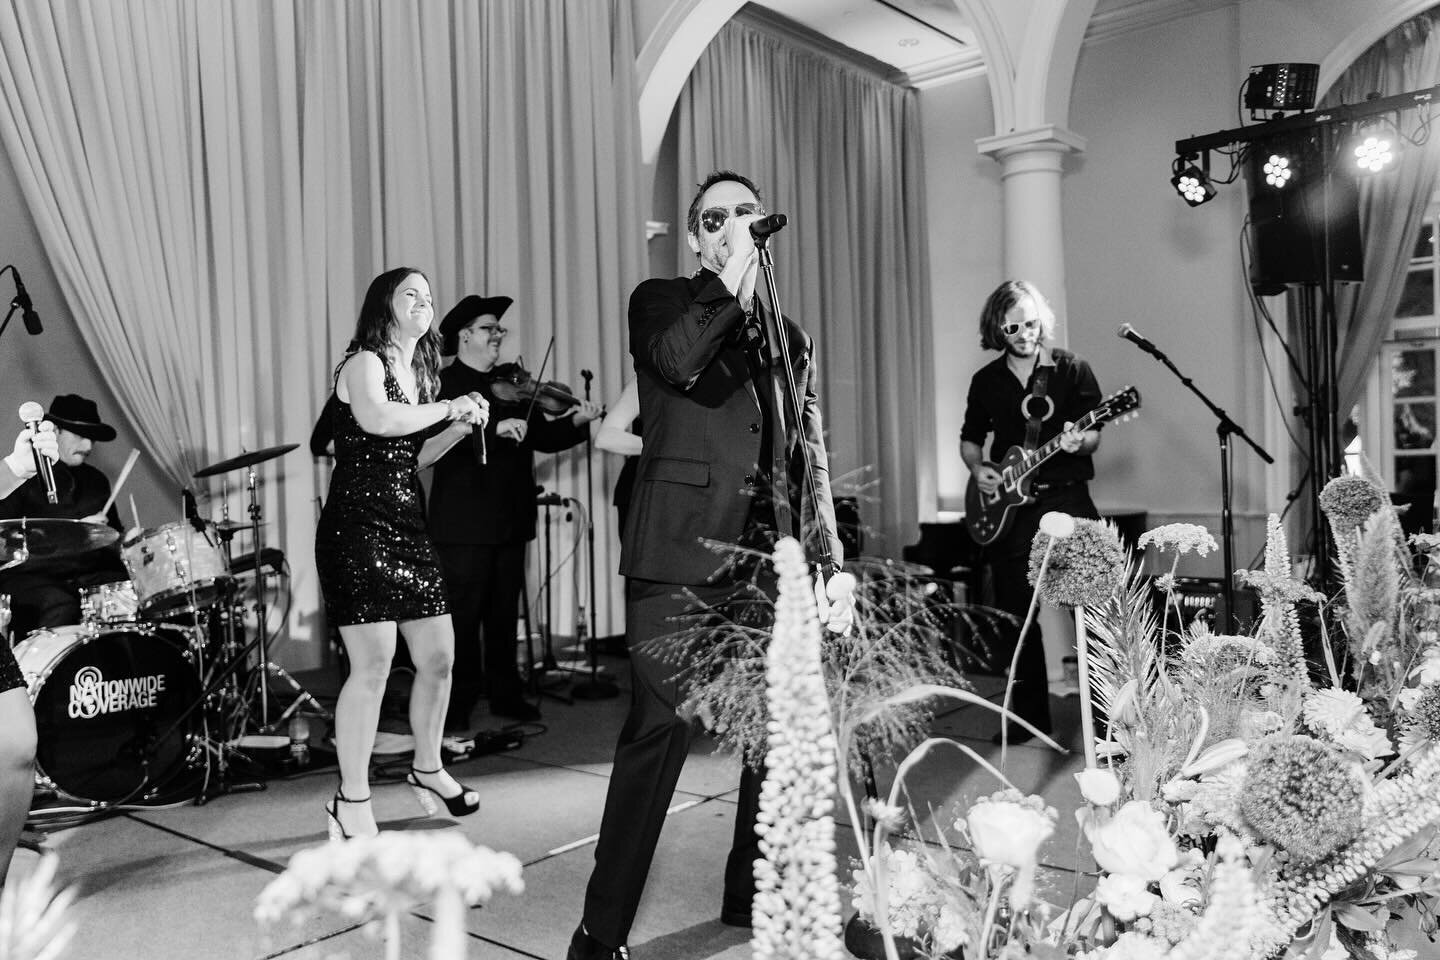 No fooling around here. We're SERIOUS about bringing the high-energy music and entertainment to your next private event. 🎵  #AprilFoolsDay

📸: @lesliehollingsworthphoto 

#weddingbands #luxuryweddingplanner #weddingreceptions #weddingsinger #coverb